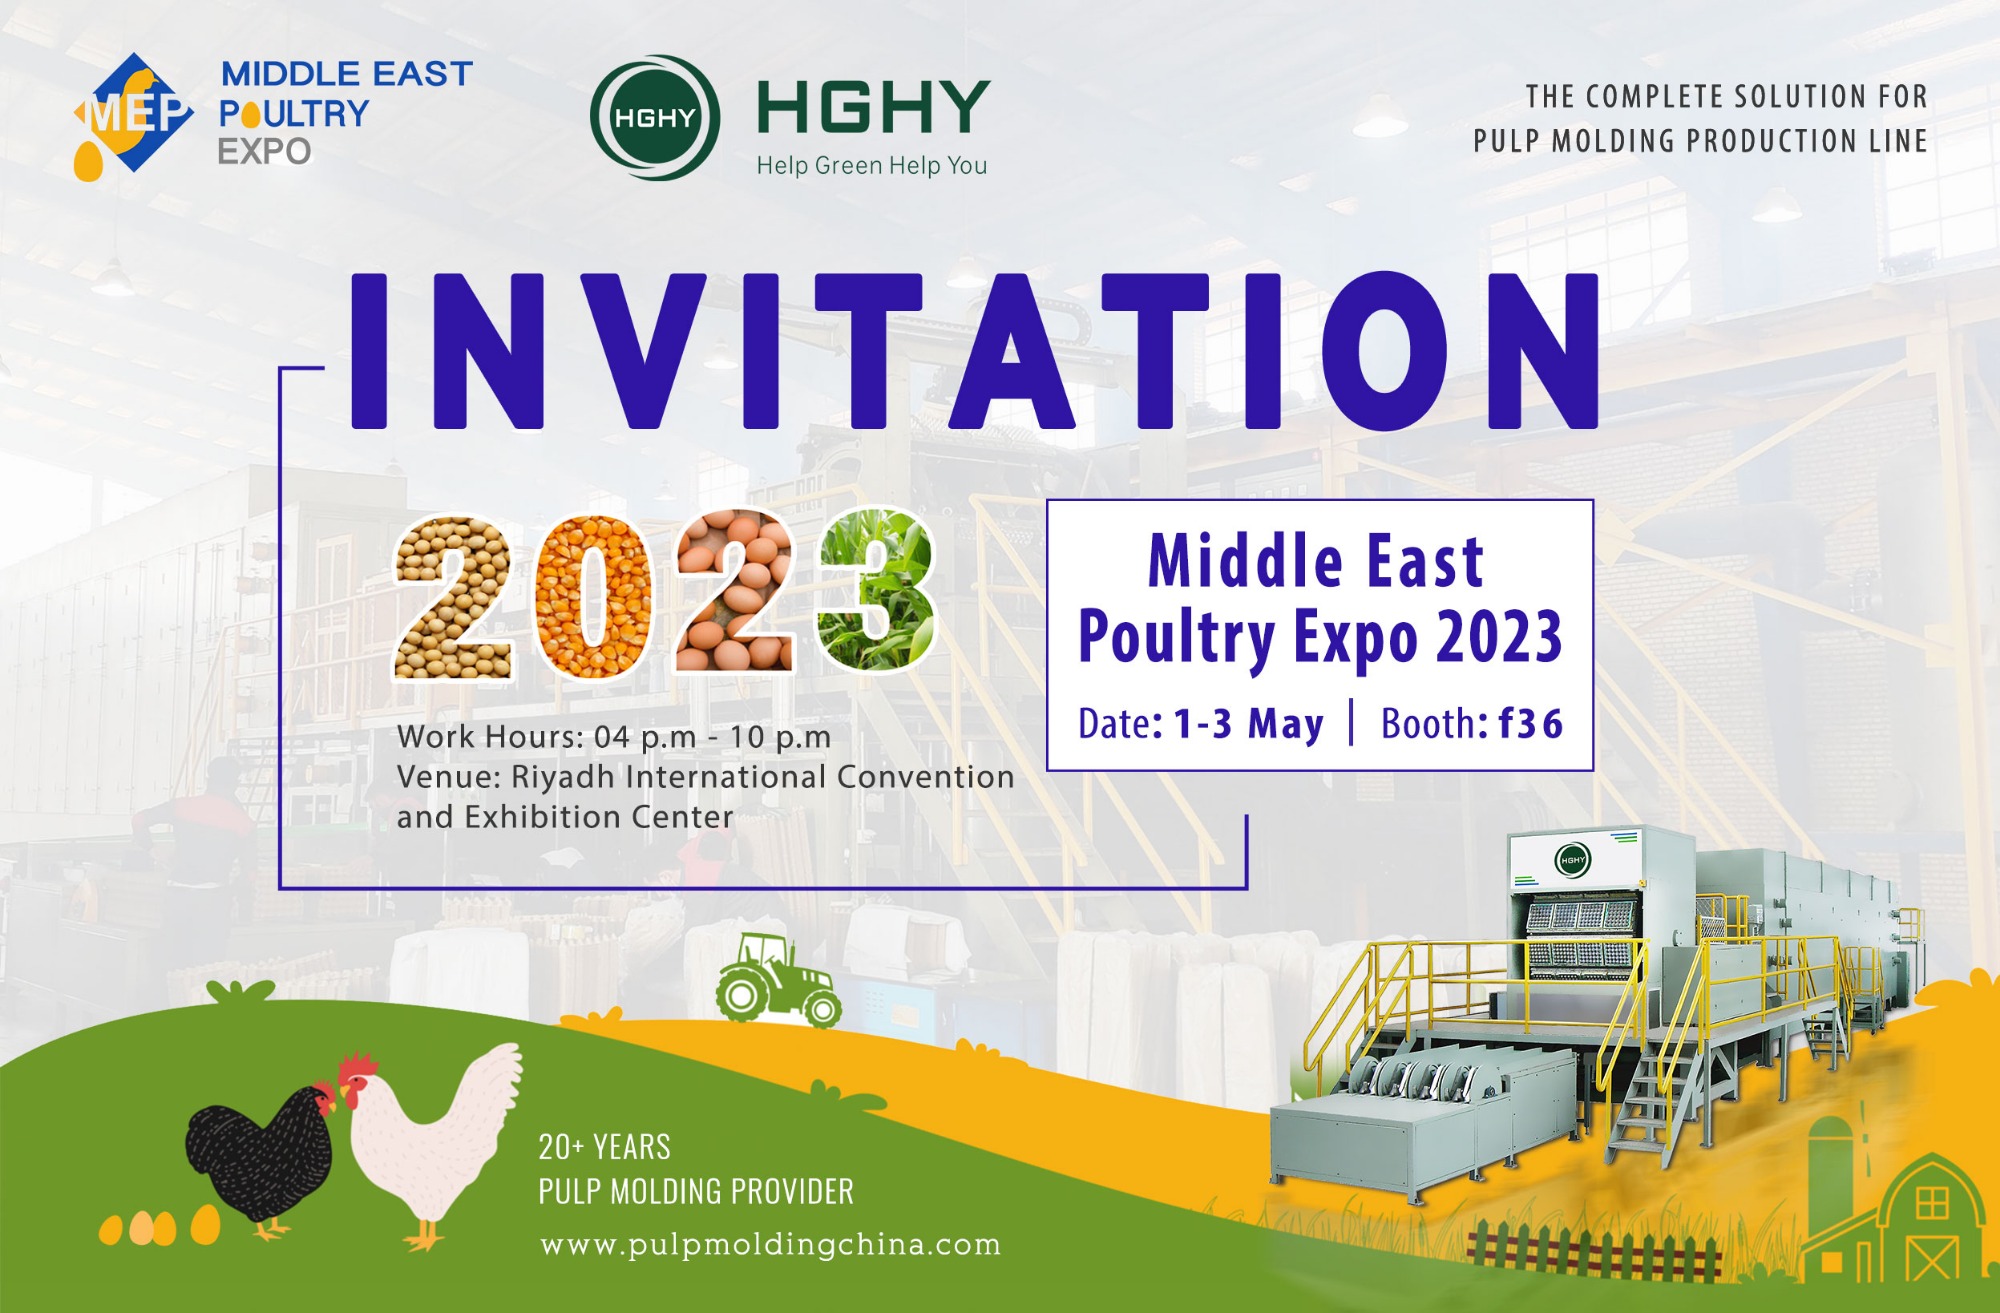 Middle East Poultry Expo